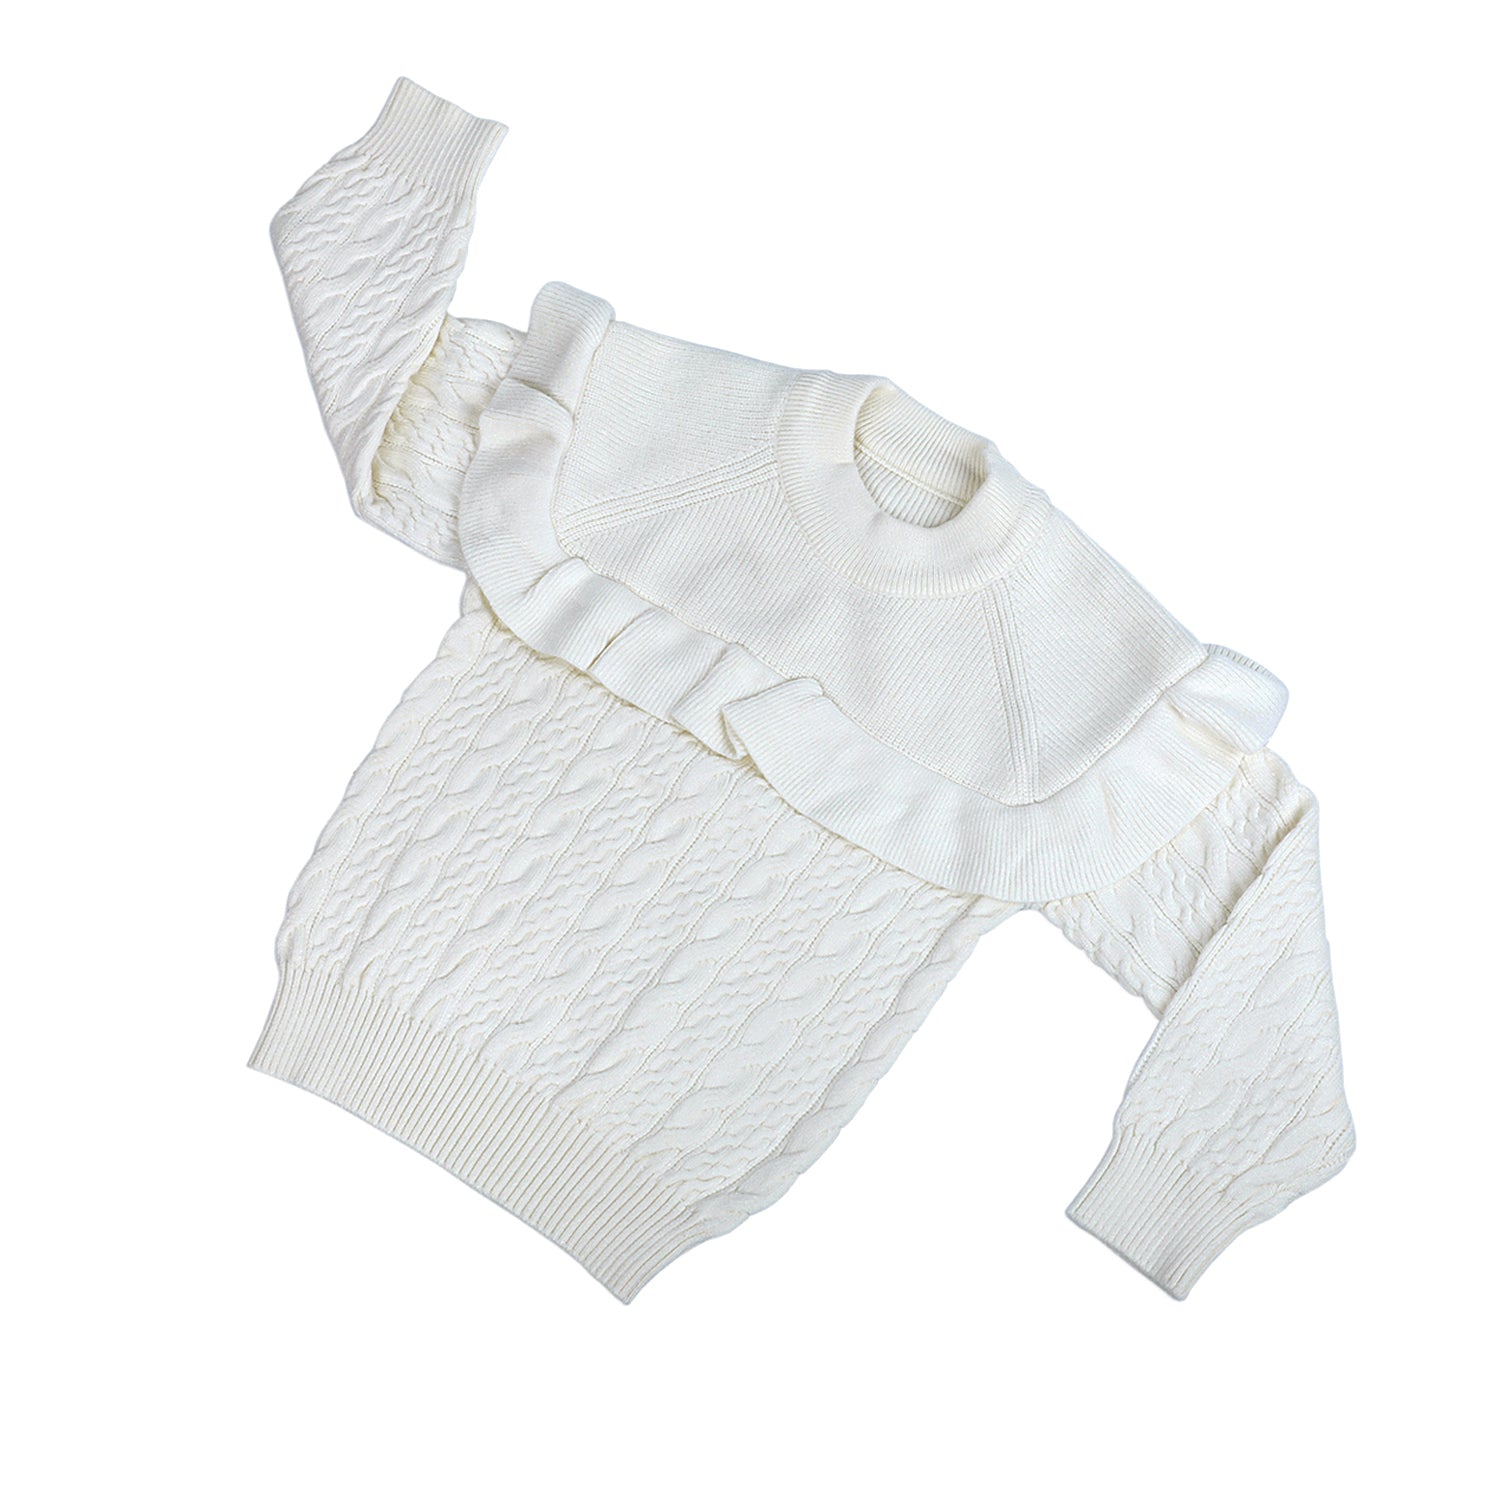 Ruffled Jumper Solid Premium Full Sleeves Braided Knit Sweater - White - Baby Moo